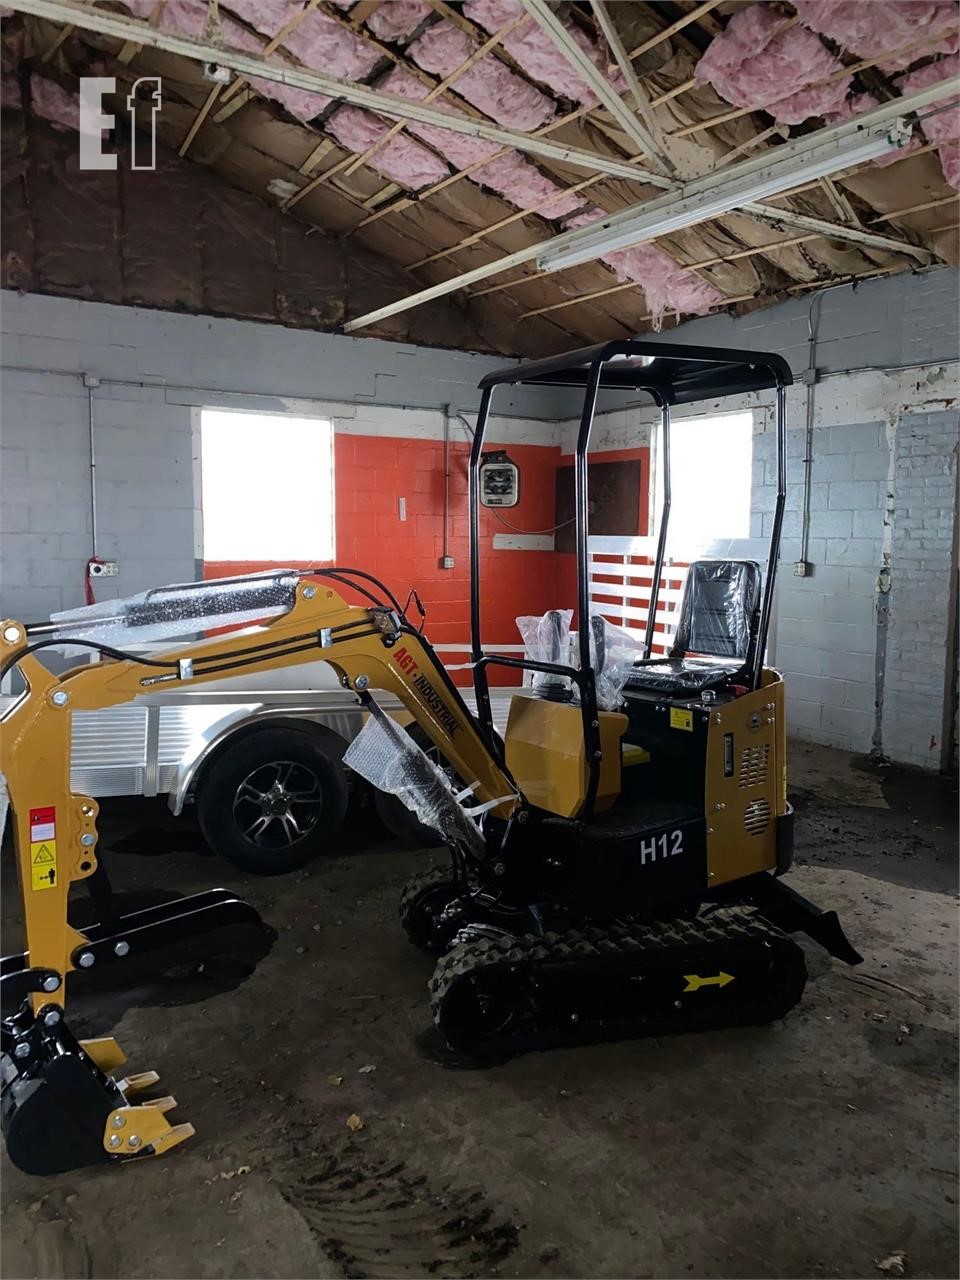 AGT INDUSTRIAL QH13R MINI EXCAVATOR Other Online Auctions In Pennsylvania -  4 Listings